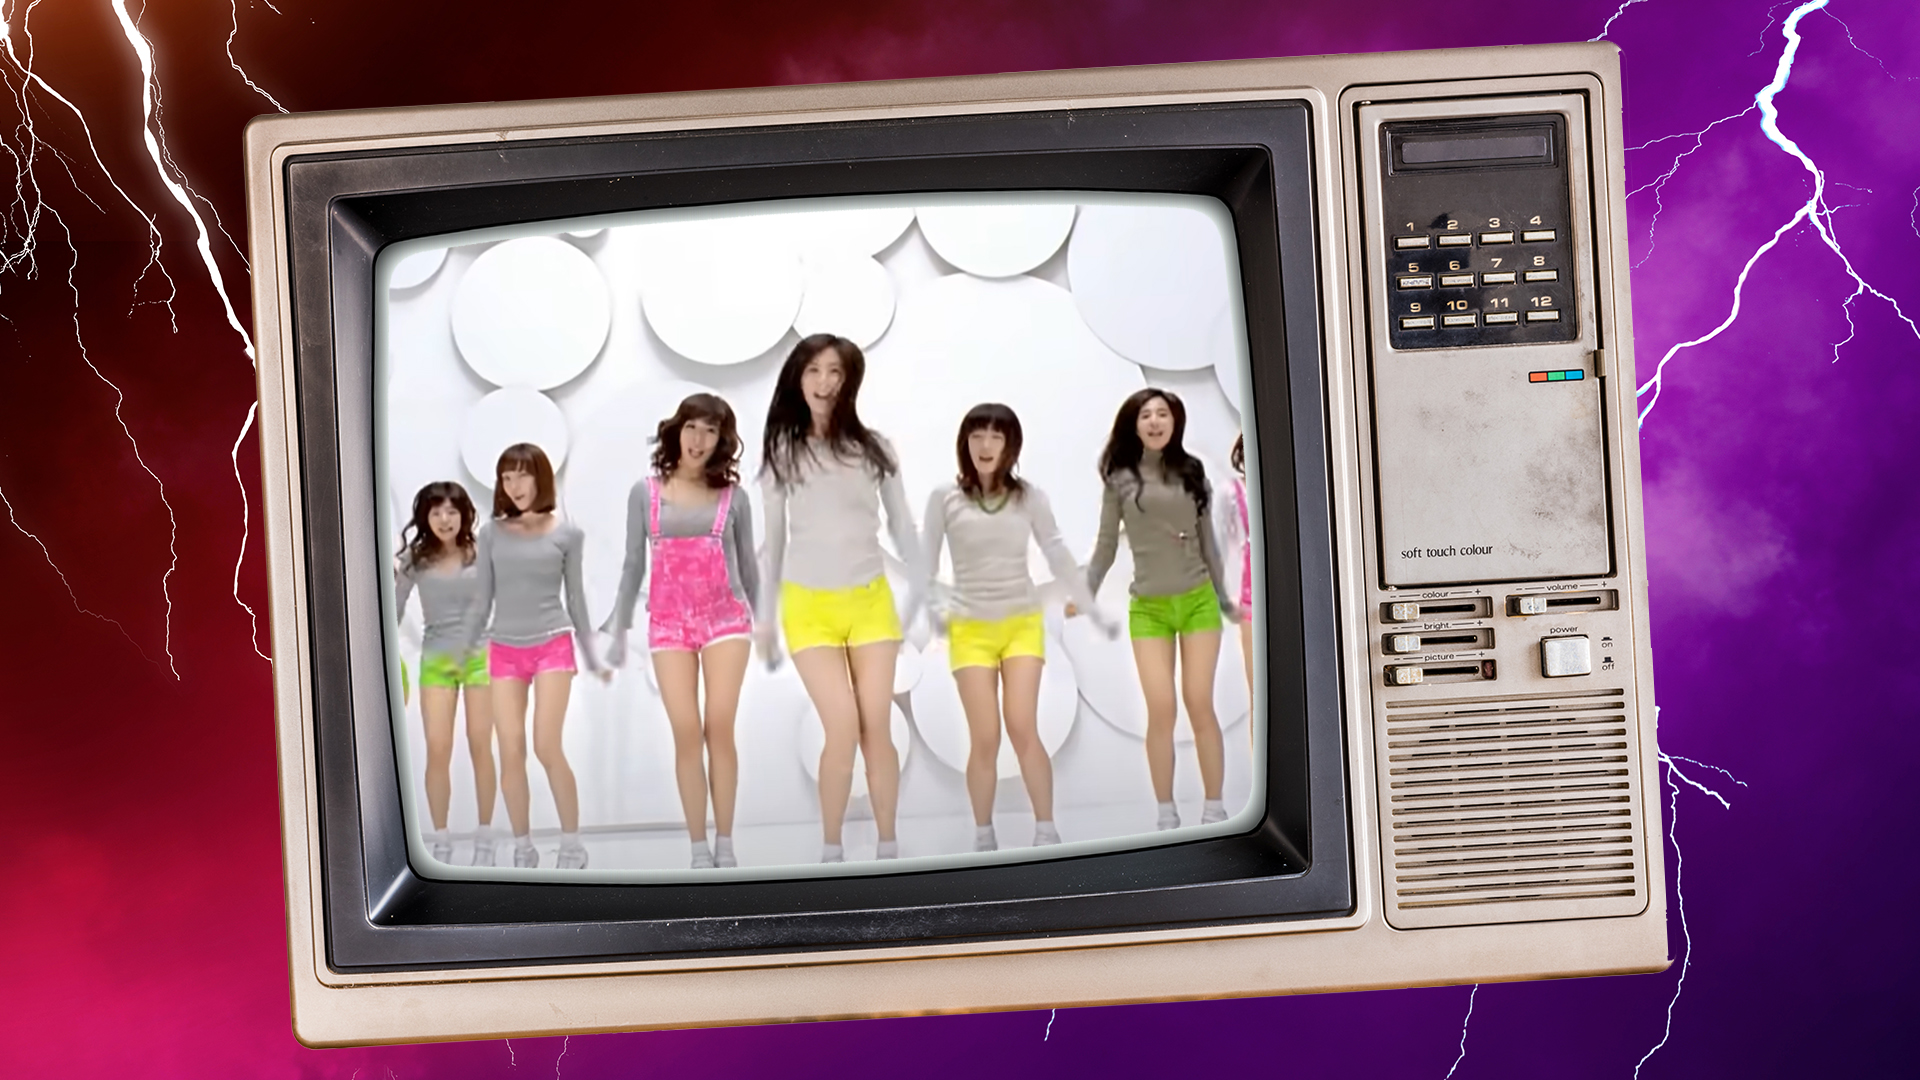 Girls' Generation shown on an old TV set